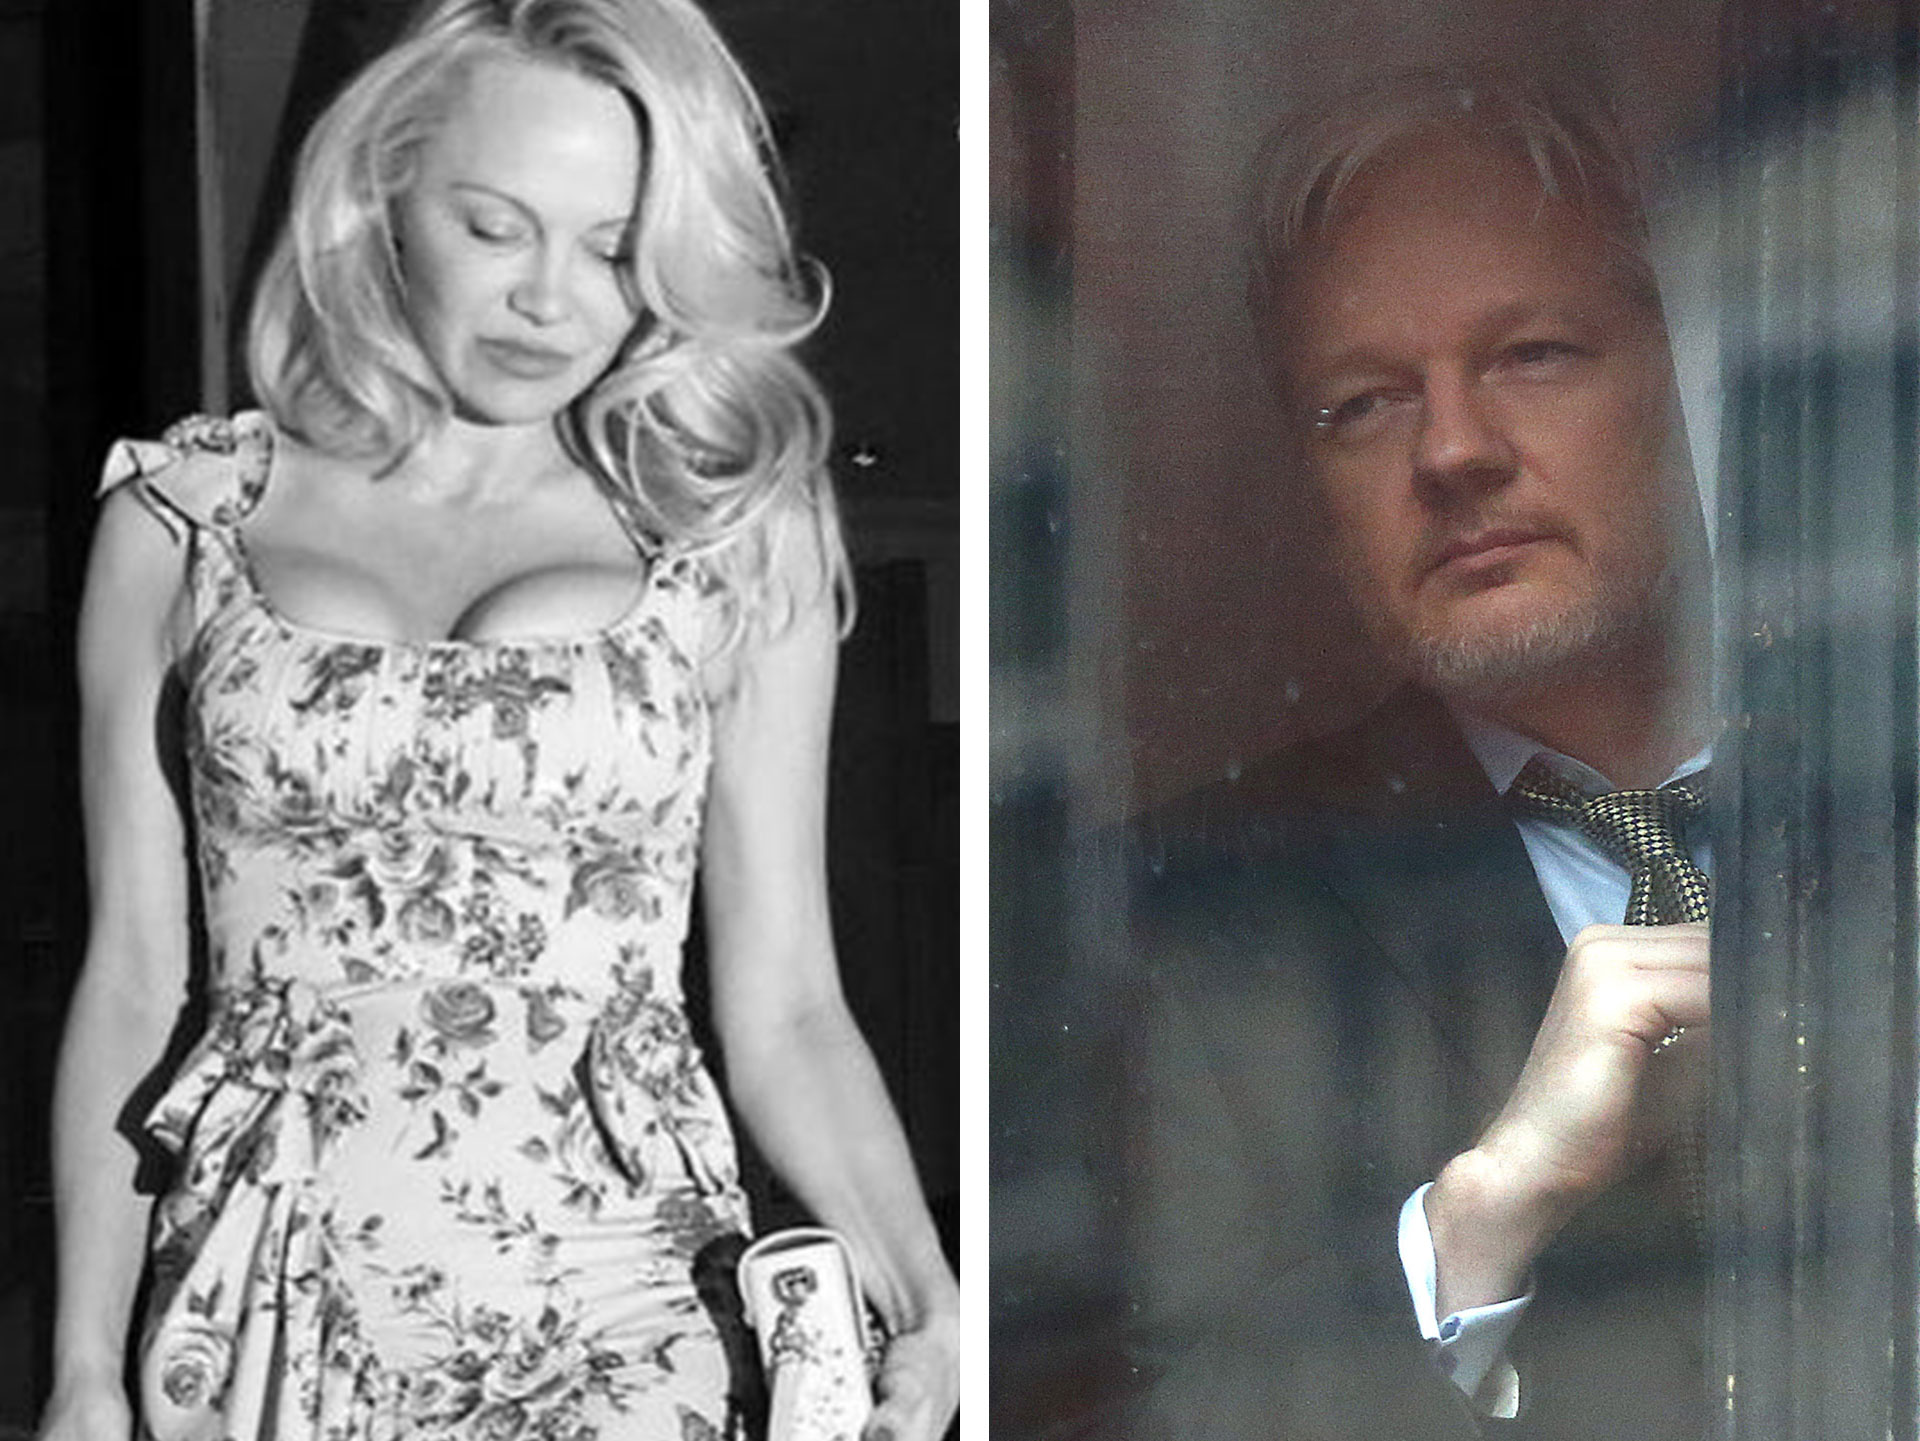 Pamela Anderson speaks out about her relationship with Julian Assange